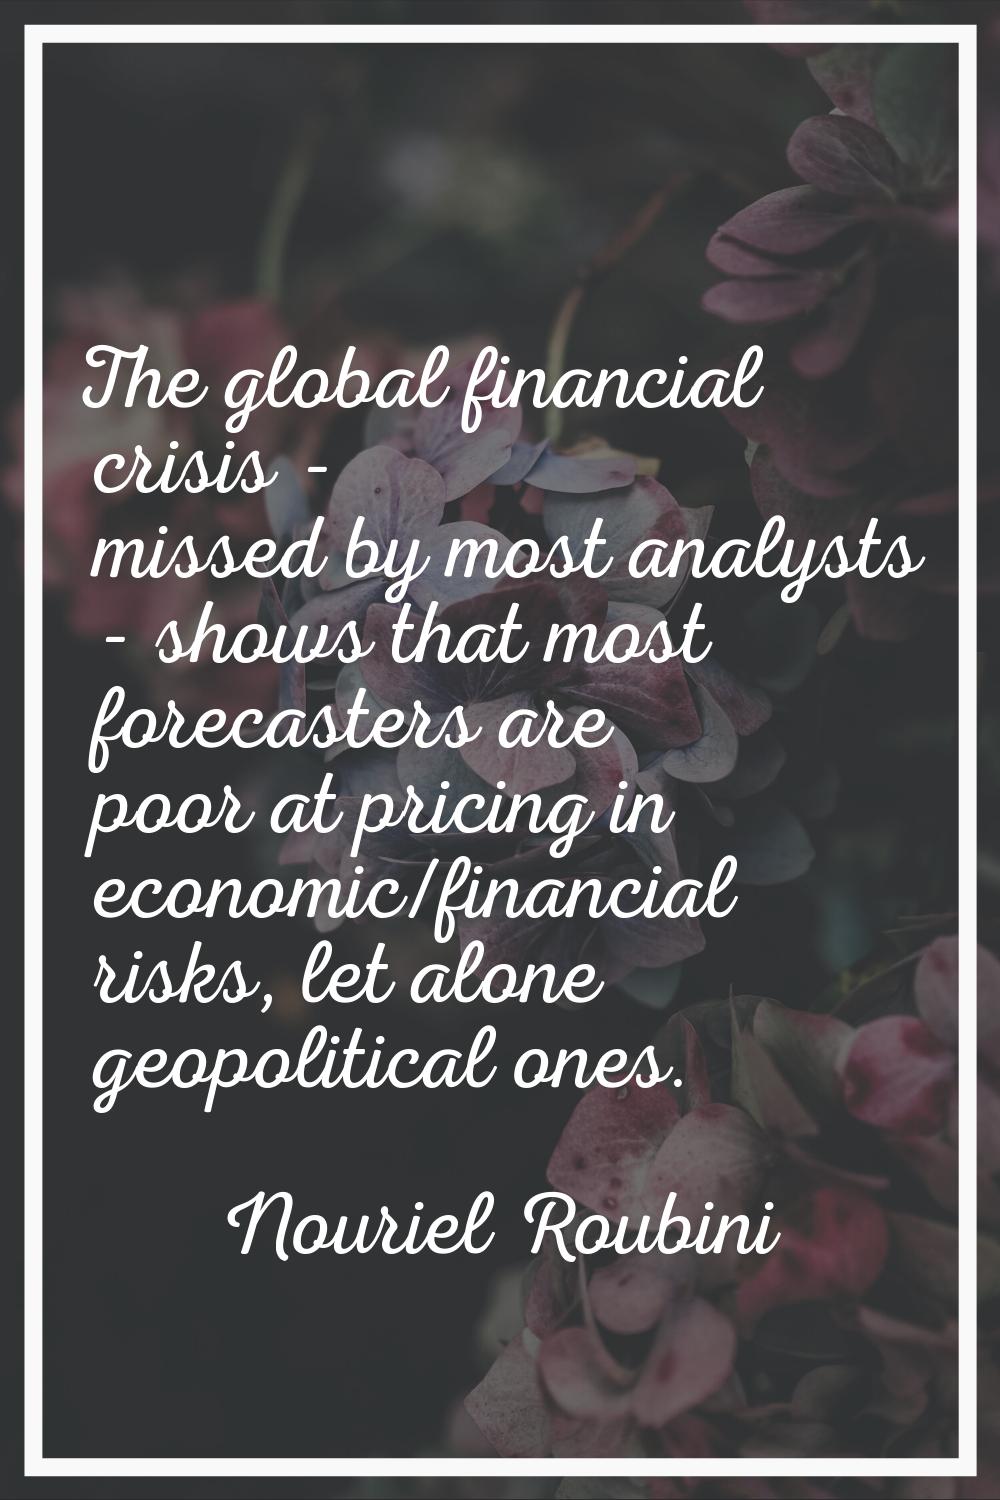 The global financial crisis - missed by most analysts - shows that most forecasters are poor at pri